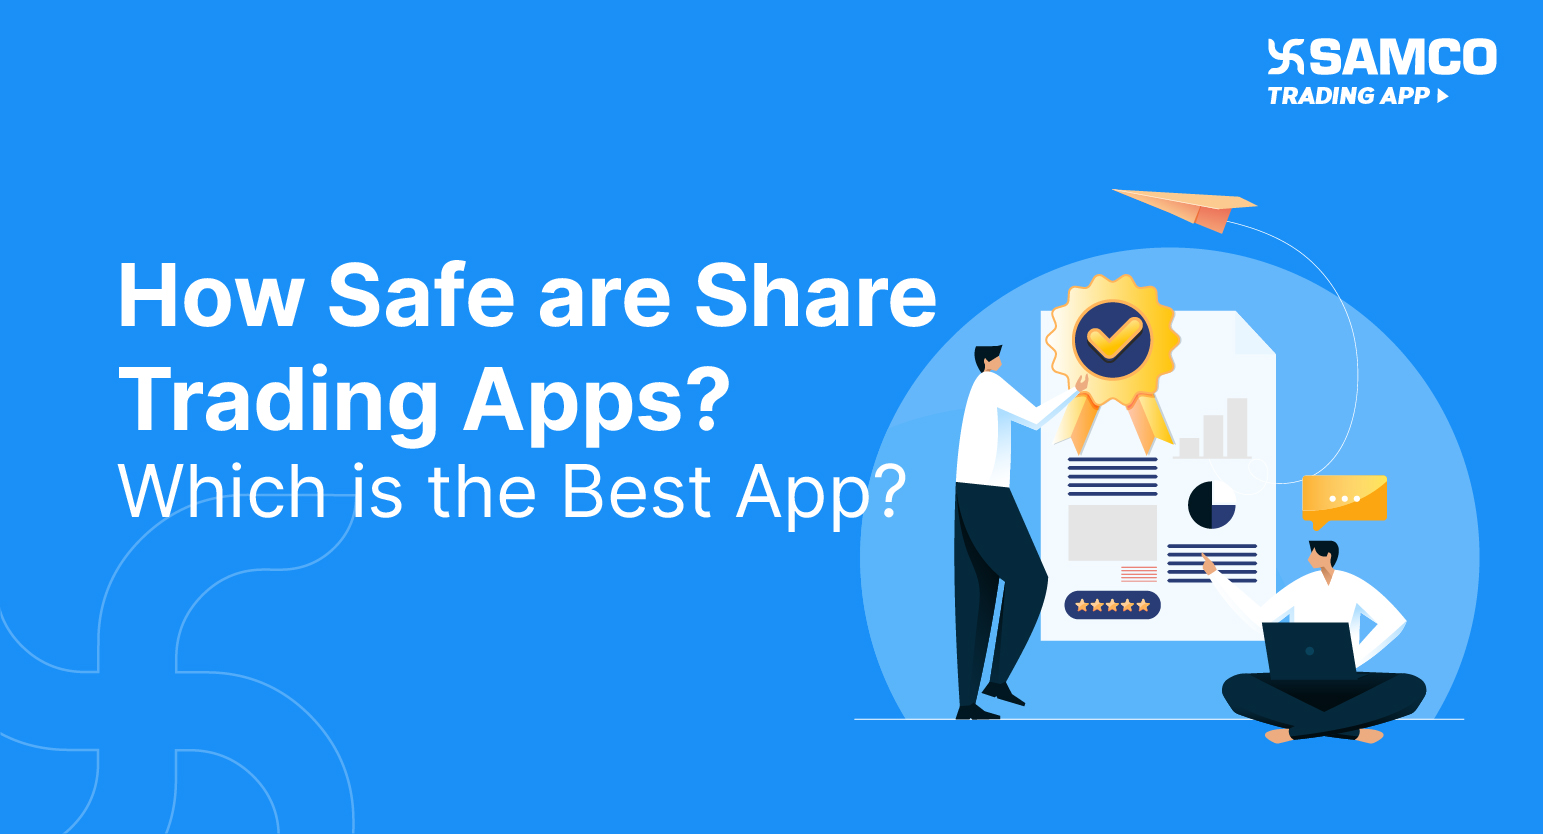 How Safe are Share Trading Apps?